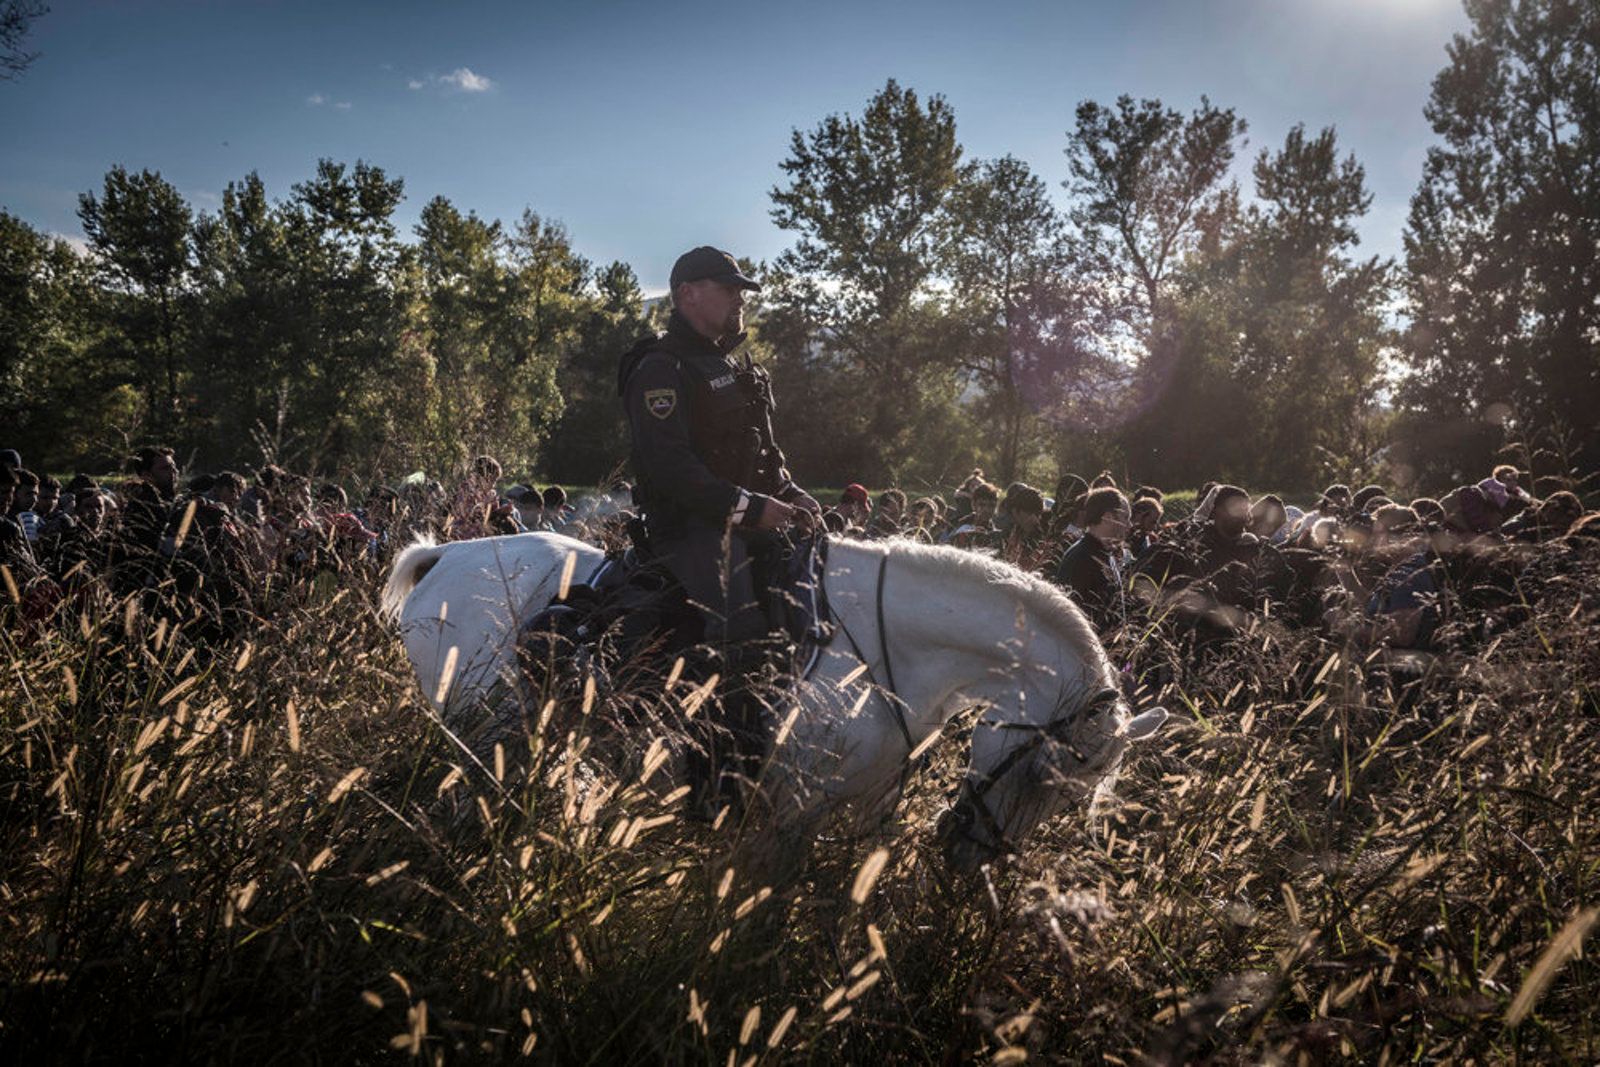 © Sergey Ponomarev - Mounted police escort hundreds of migrants after they crossed from Croatia in Dobova, Slovenia.